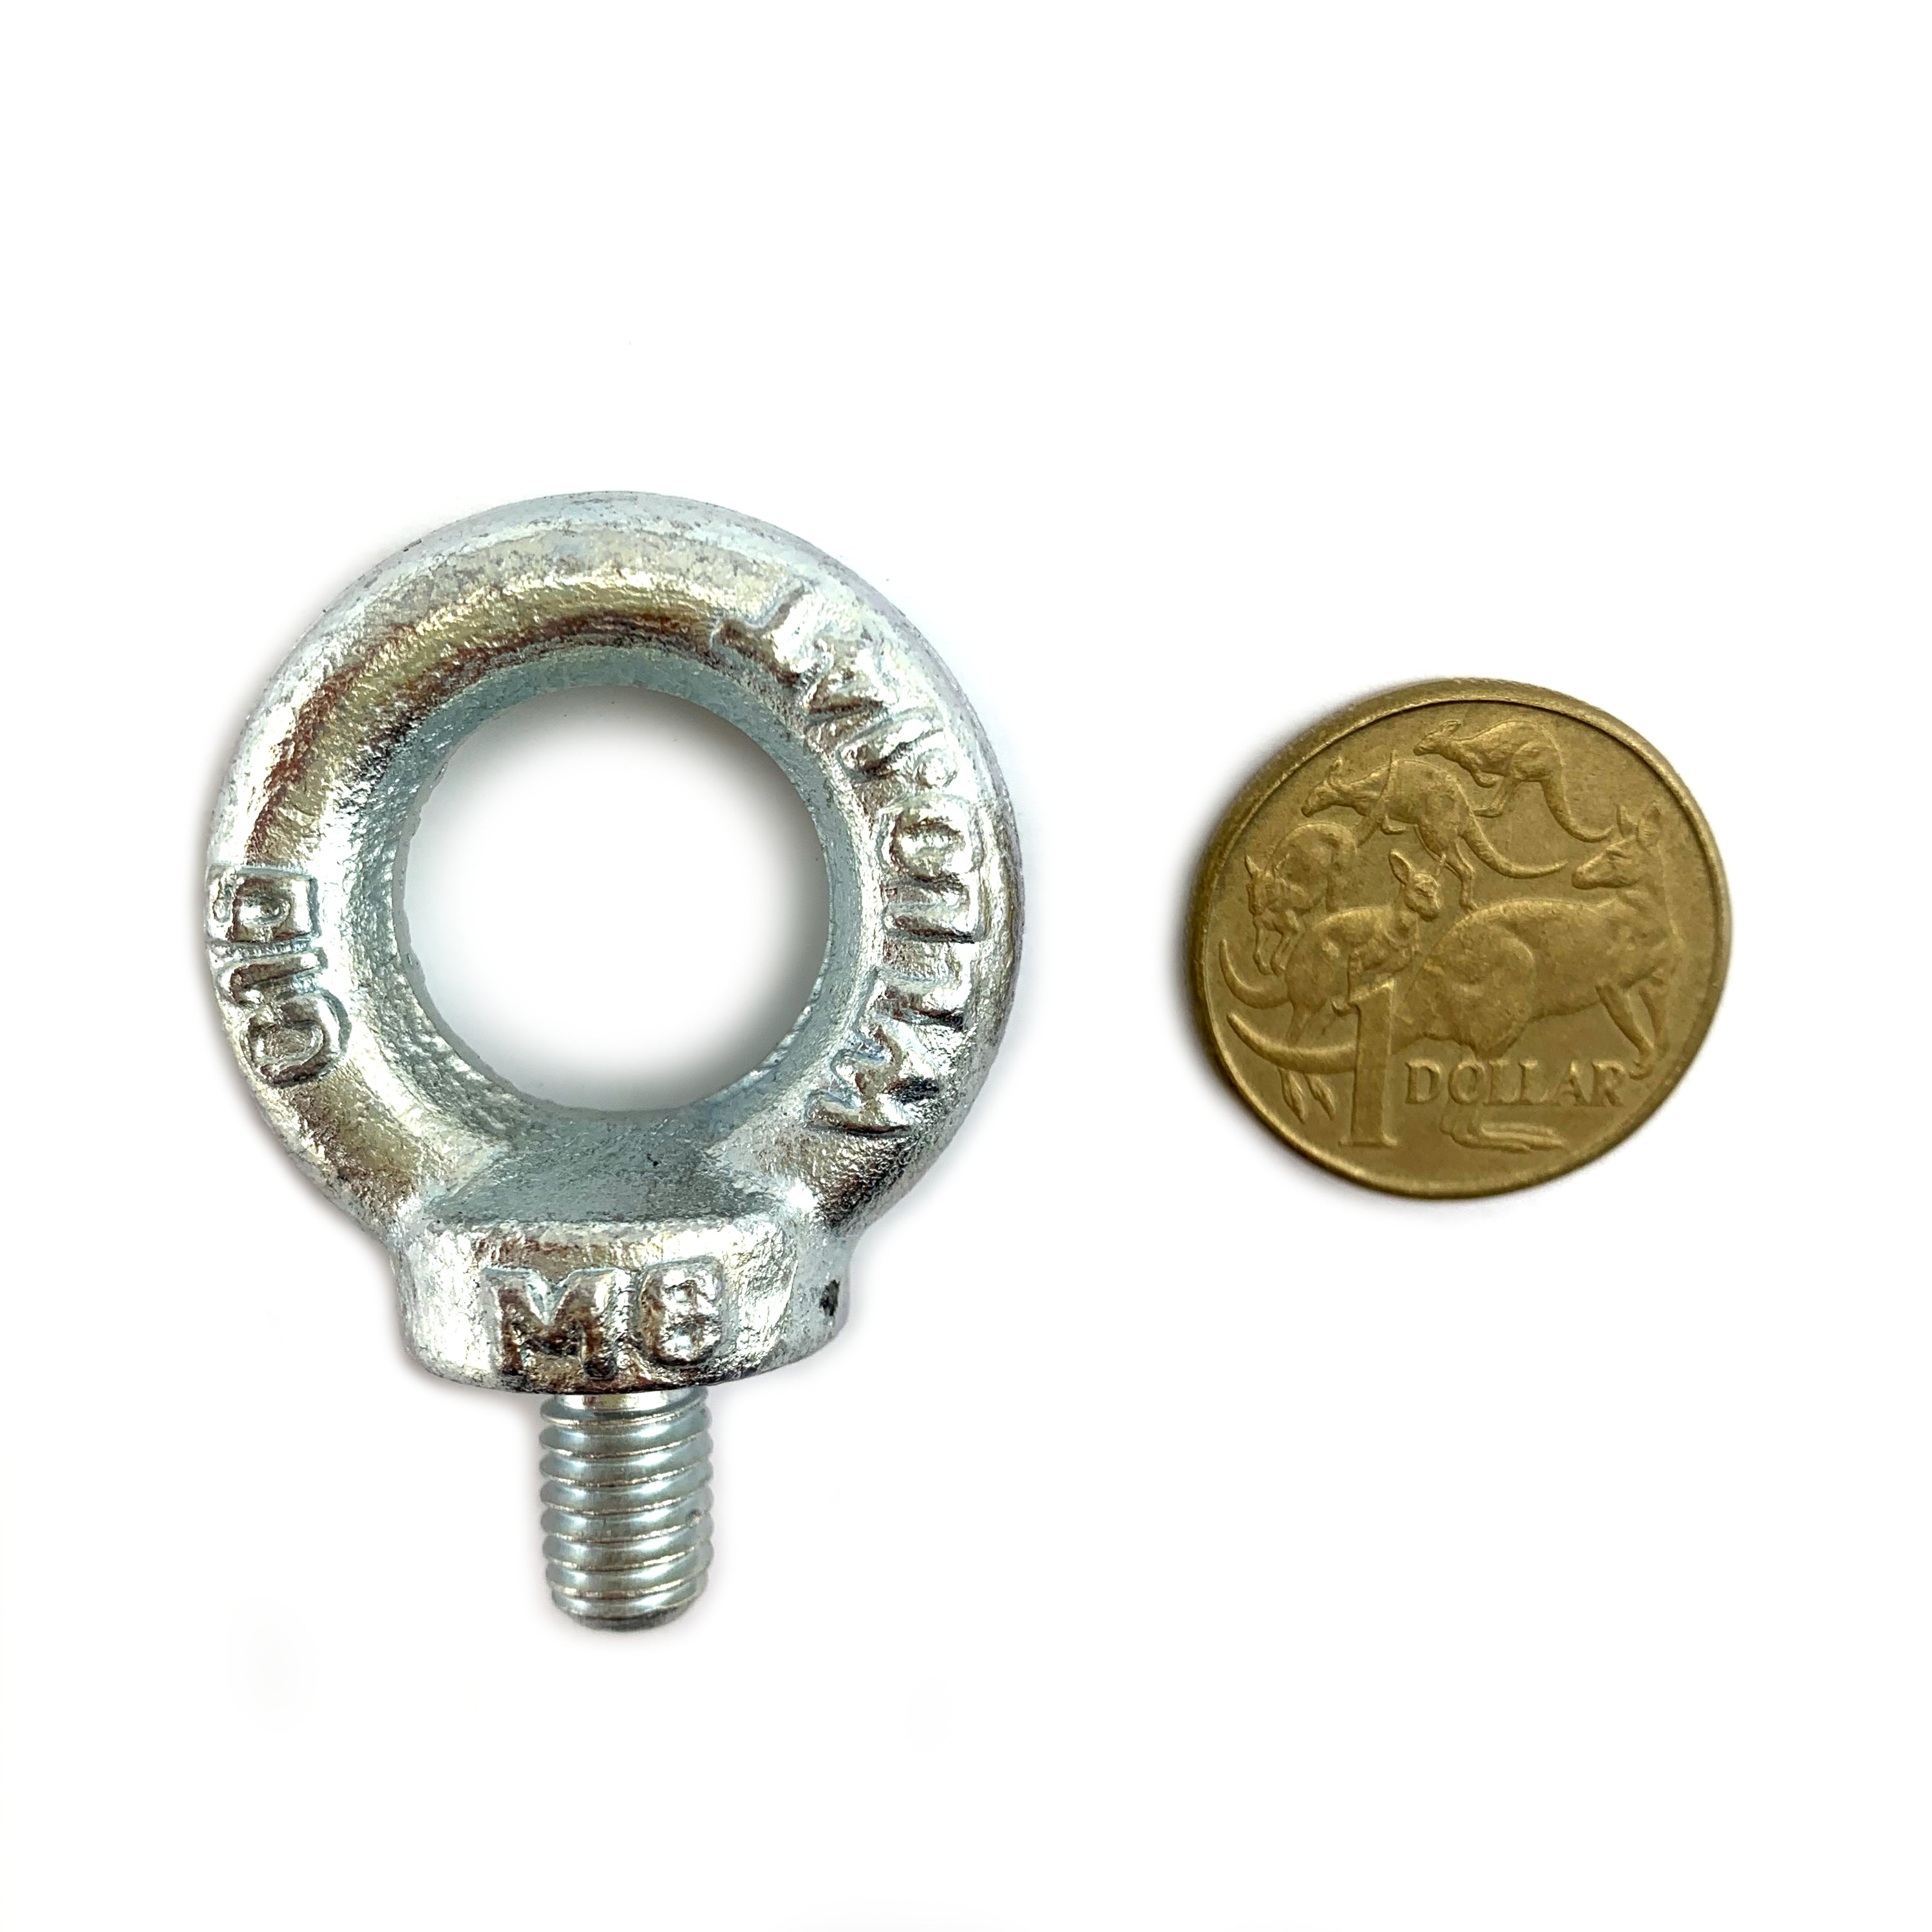 Lifting Eye Bolt Galvanised, Size 8mm x 10mm Thread. Shop hardware bolts online. Australia wide shipping.